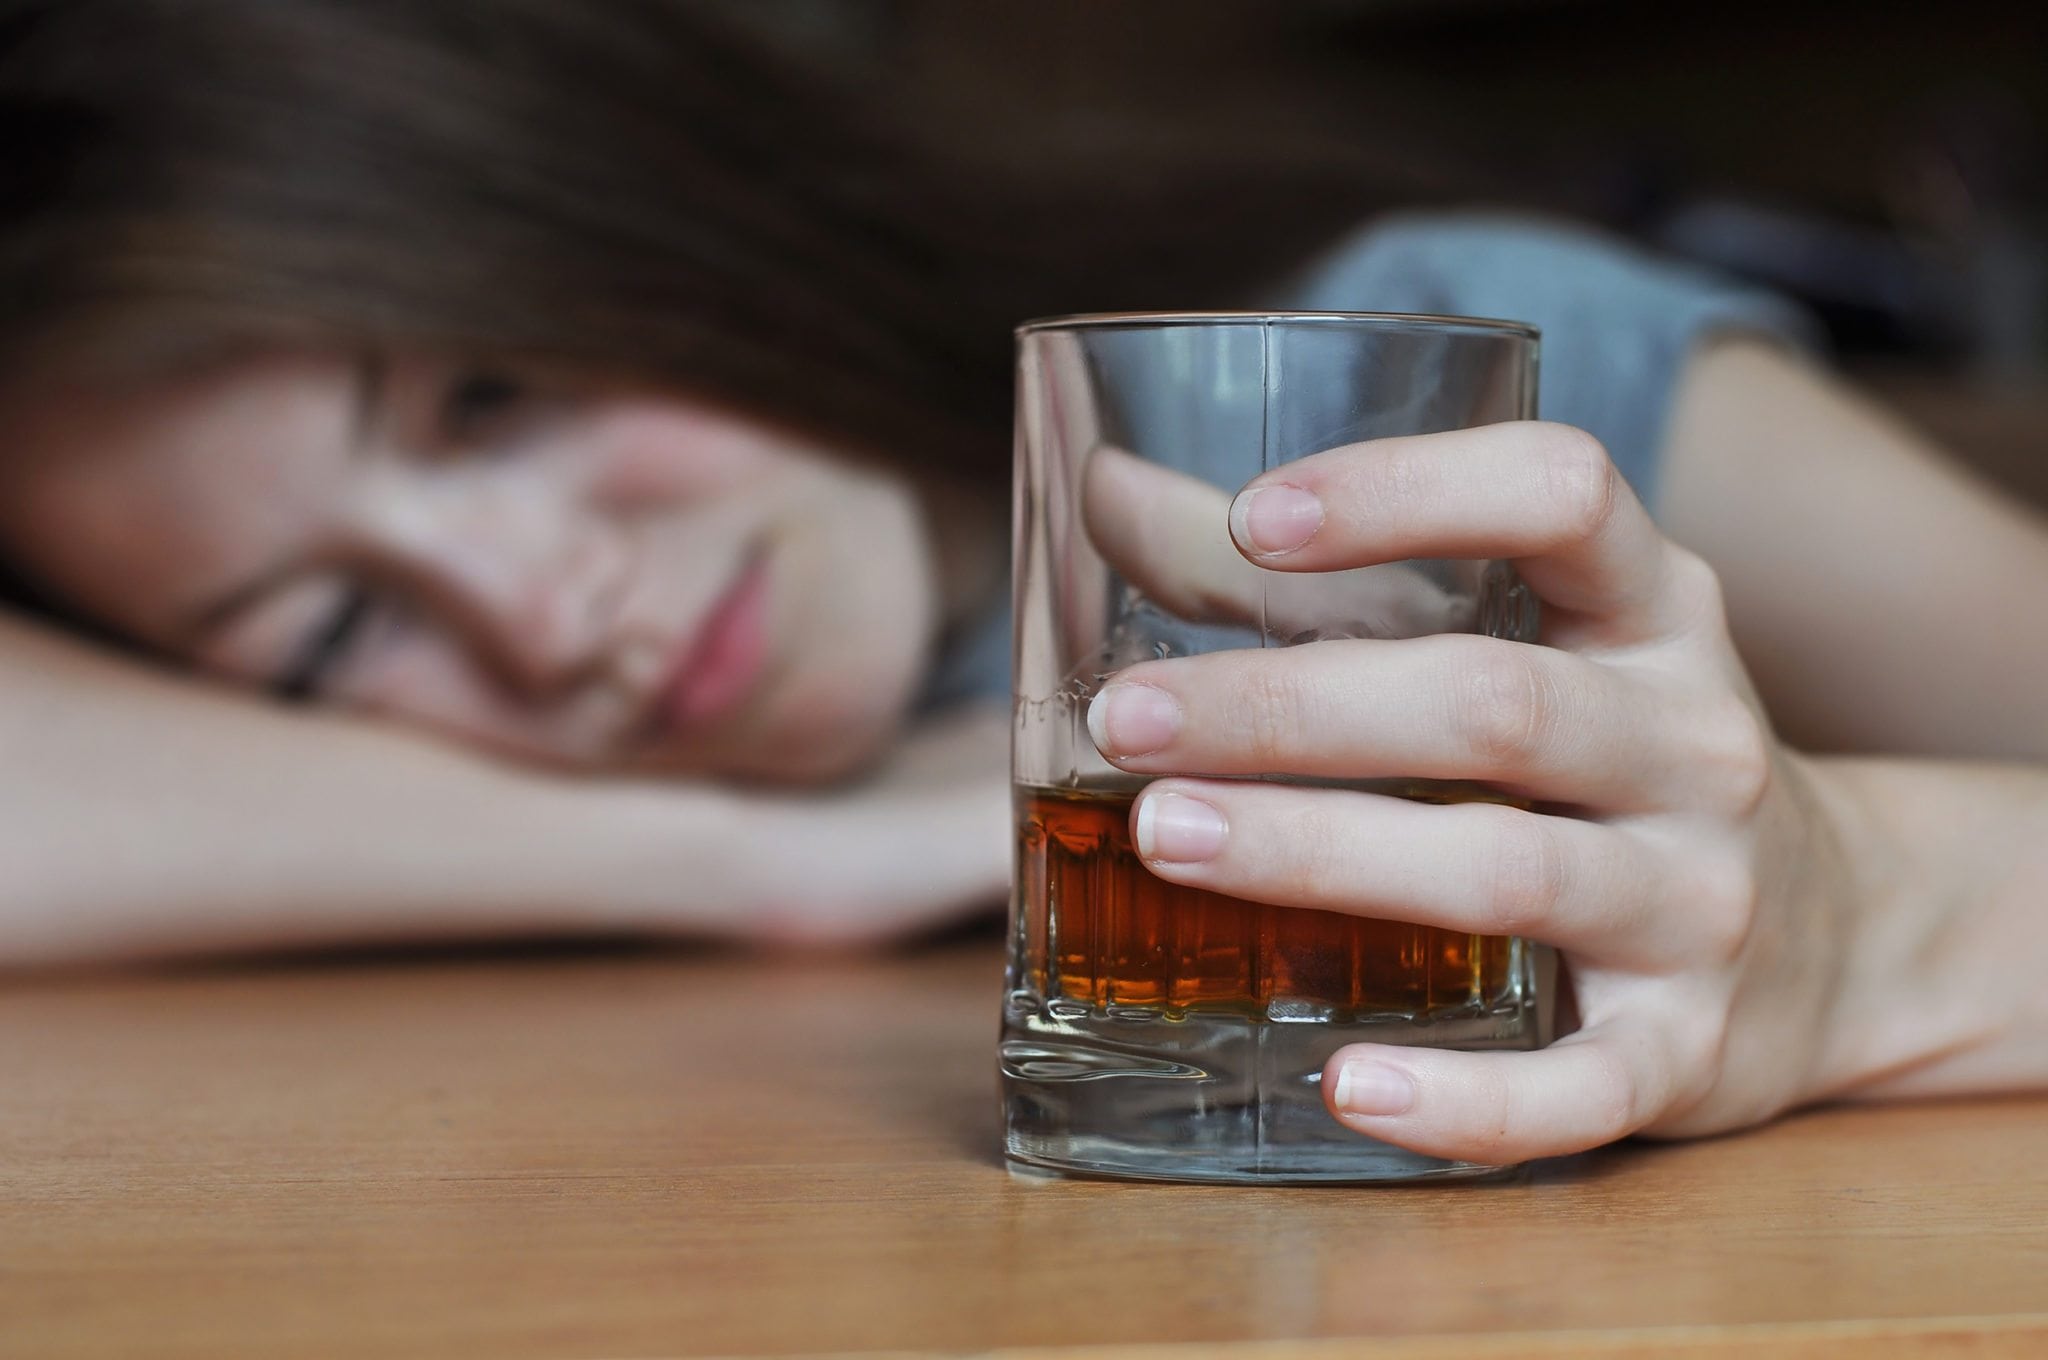 Women and Alcohol Use: The Pandemic Factor